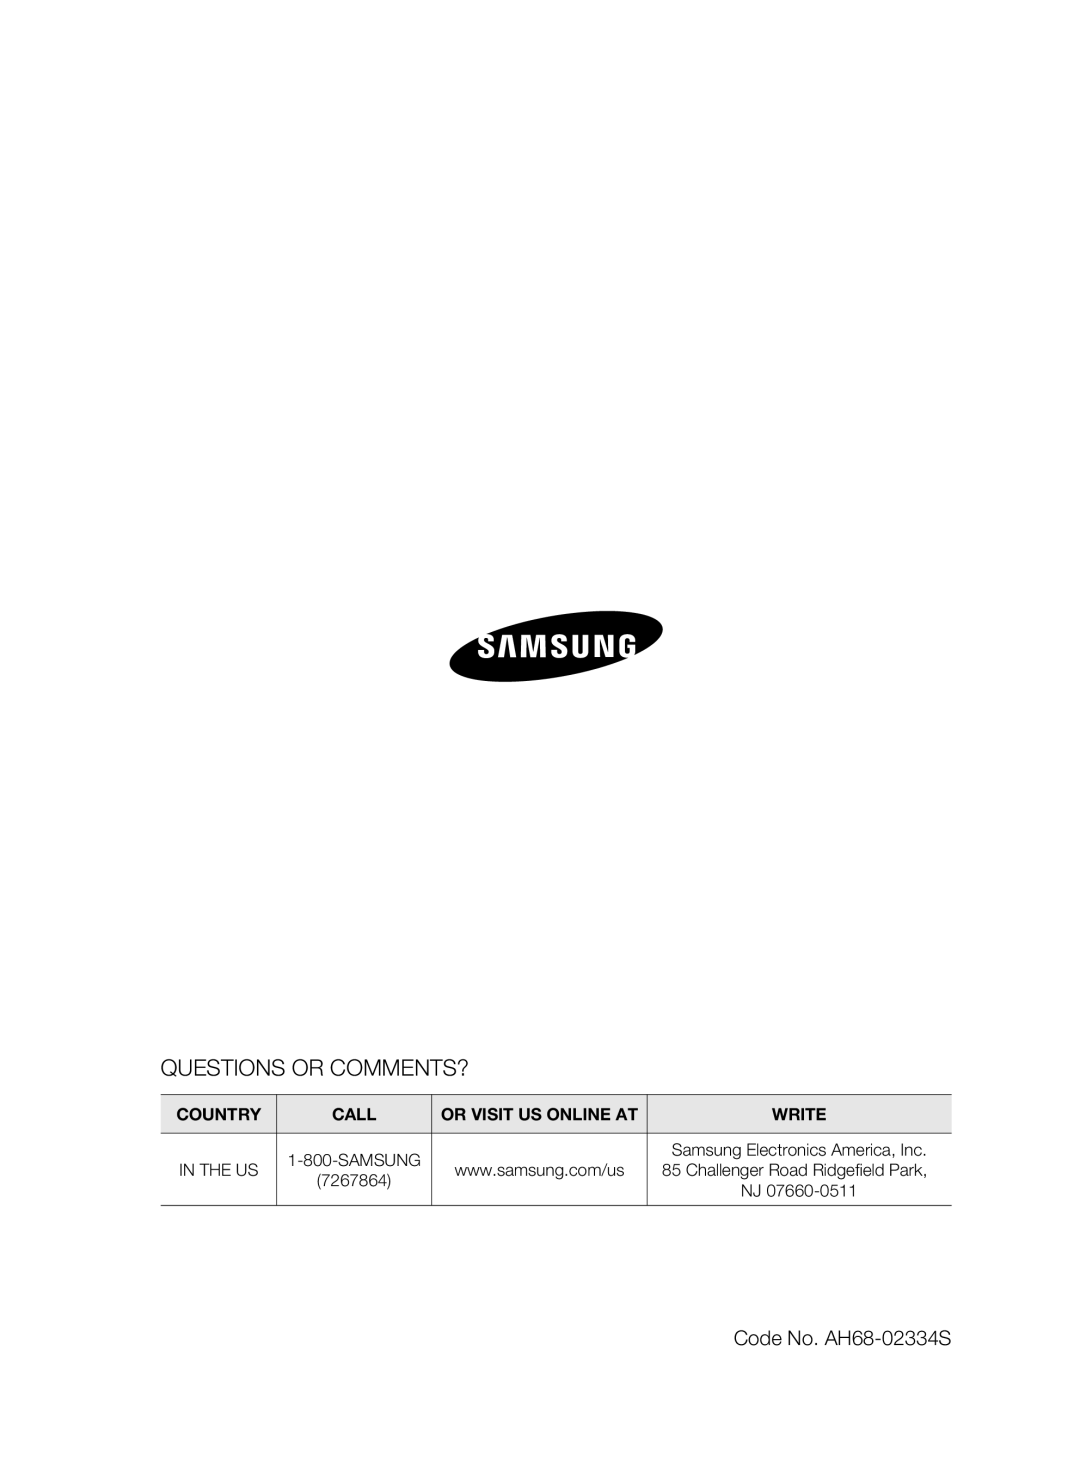 Samsung HW-D7000 user manual Questions Or Comments?, Country, Call, Or Visit Us Online At, Write 